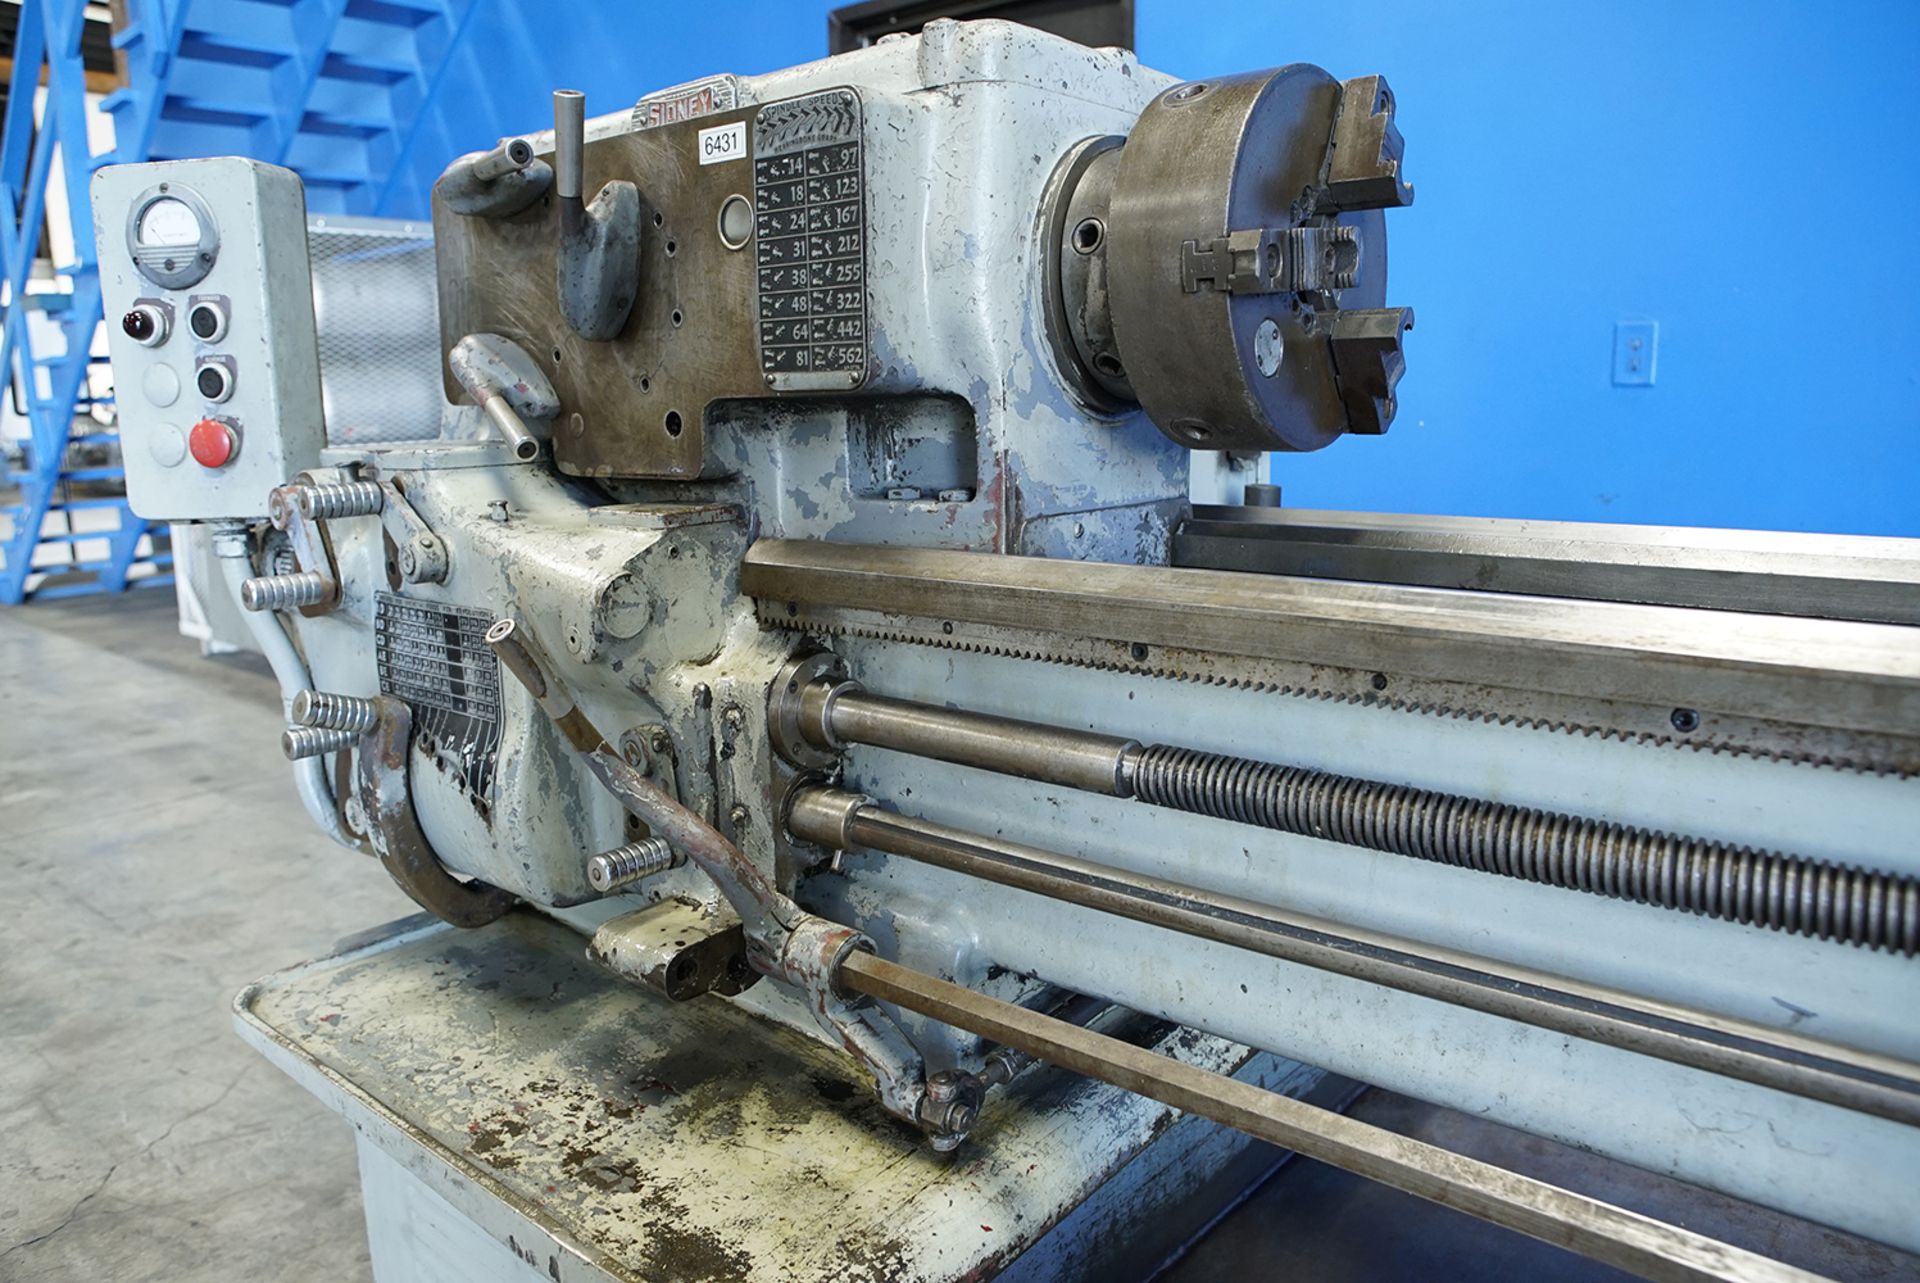 Sidney 16916 Lathe, 16” x 150”, 3-Jaw Chuck, Taper Attachment, Steady Rest (6431) - Image 7 of 10